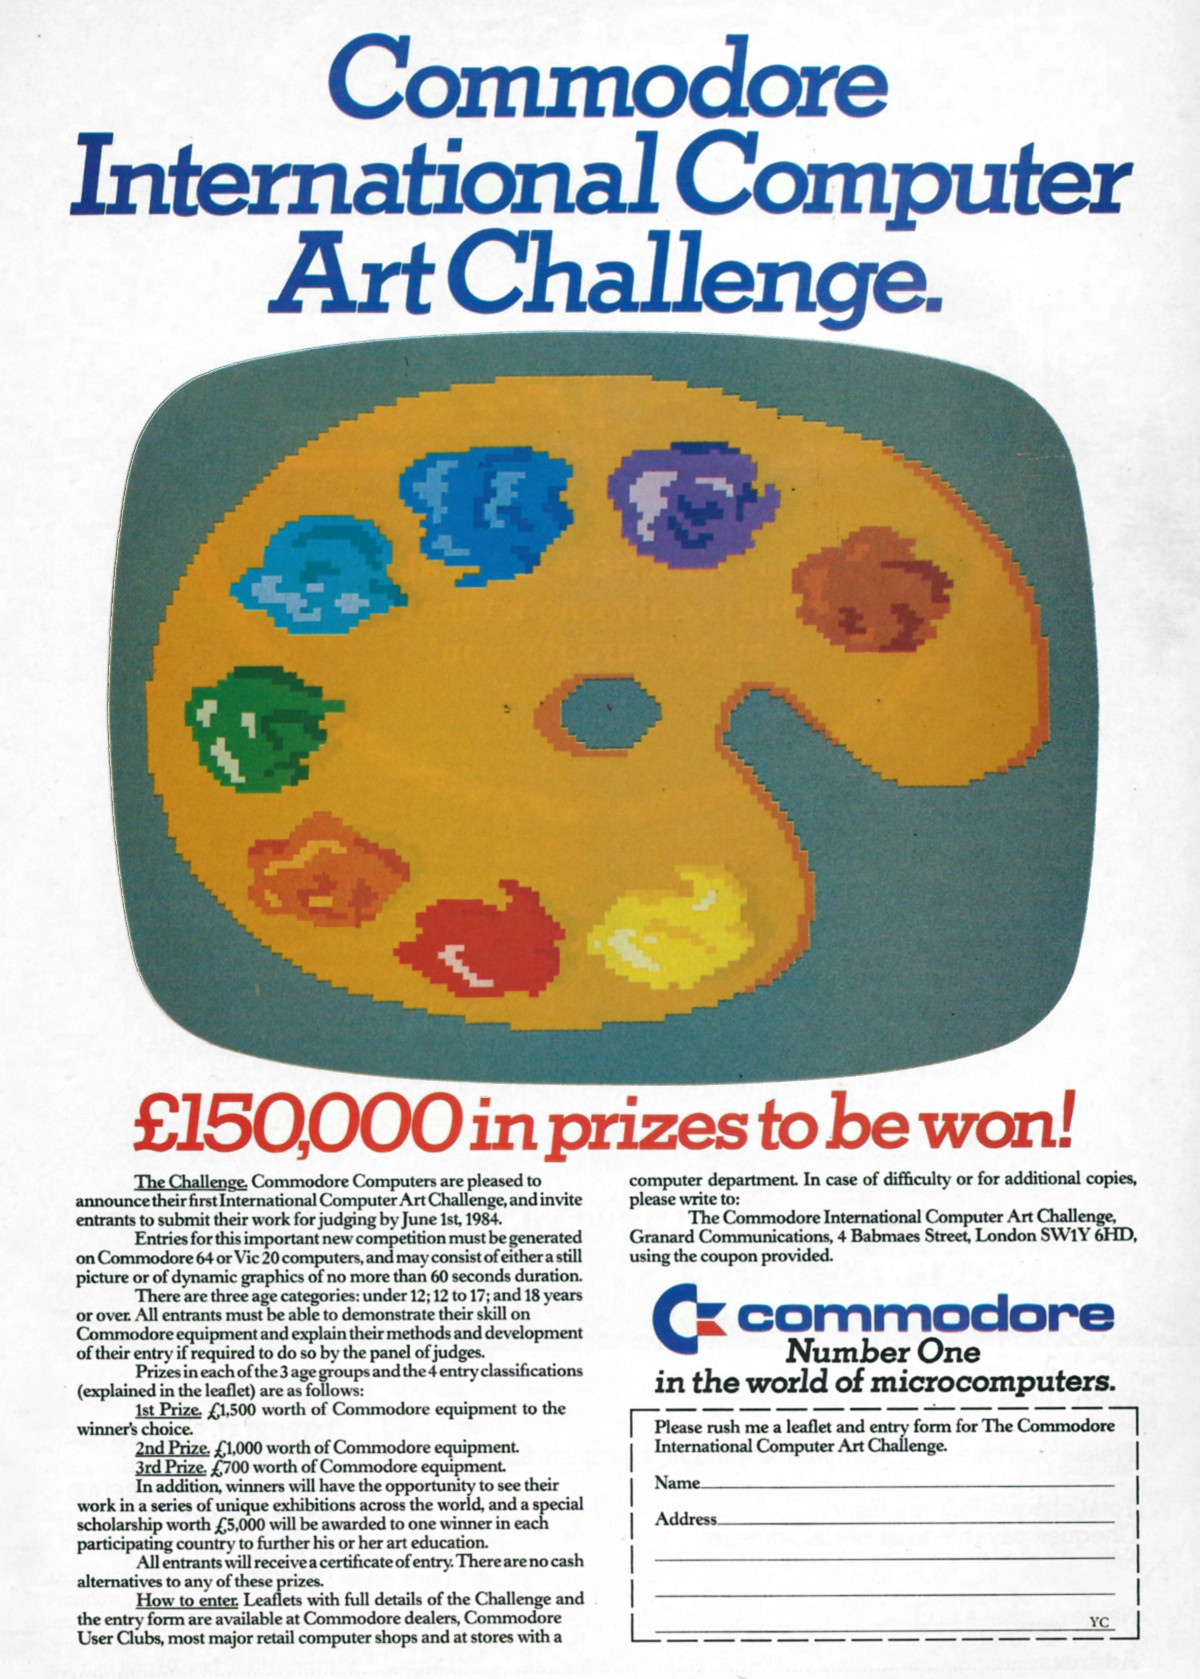 An advert for Commodore's International Computer Art Challenge, from Your Computer, May 1984